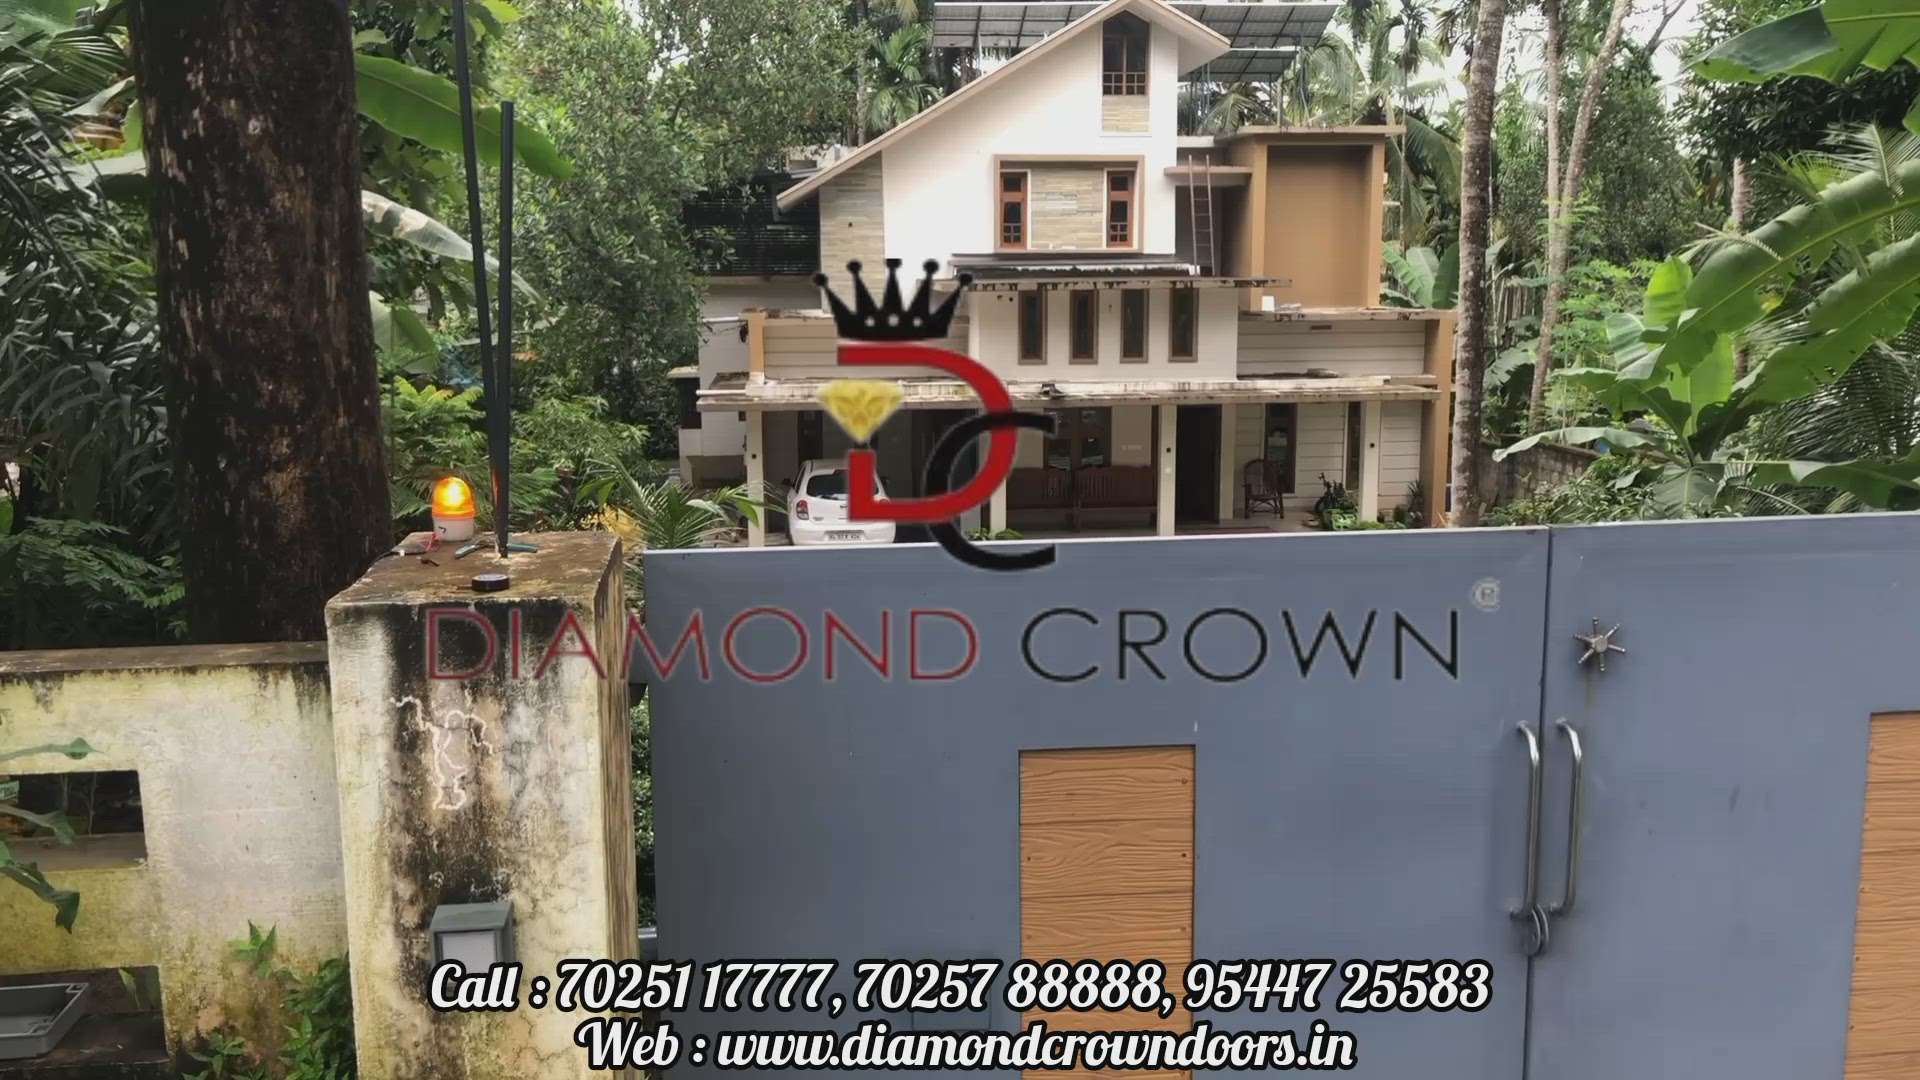 Let the good door open for you...!!
Get in touch with Diamond Crown for the most modern gate automation technologies. 
For more details contact: 09142777762 , 7025117777, 7025788888, 9544725583
#diamondcrownautomation #automaticgate #swinggate #remotegate  #homeautomation #crownmarketing #slidinggatemotors #slidinggate #canopy #moderndesign #beautiful #smarthome #home #InteriorDesigner